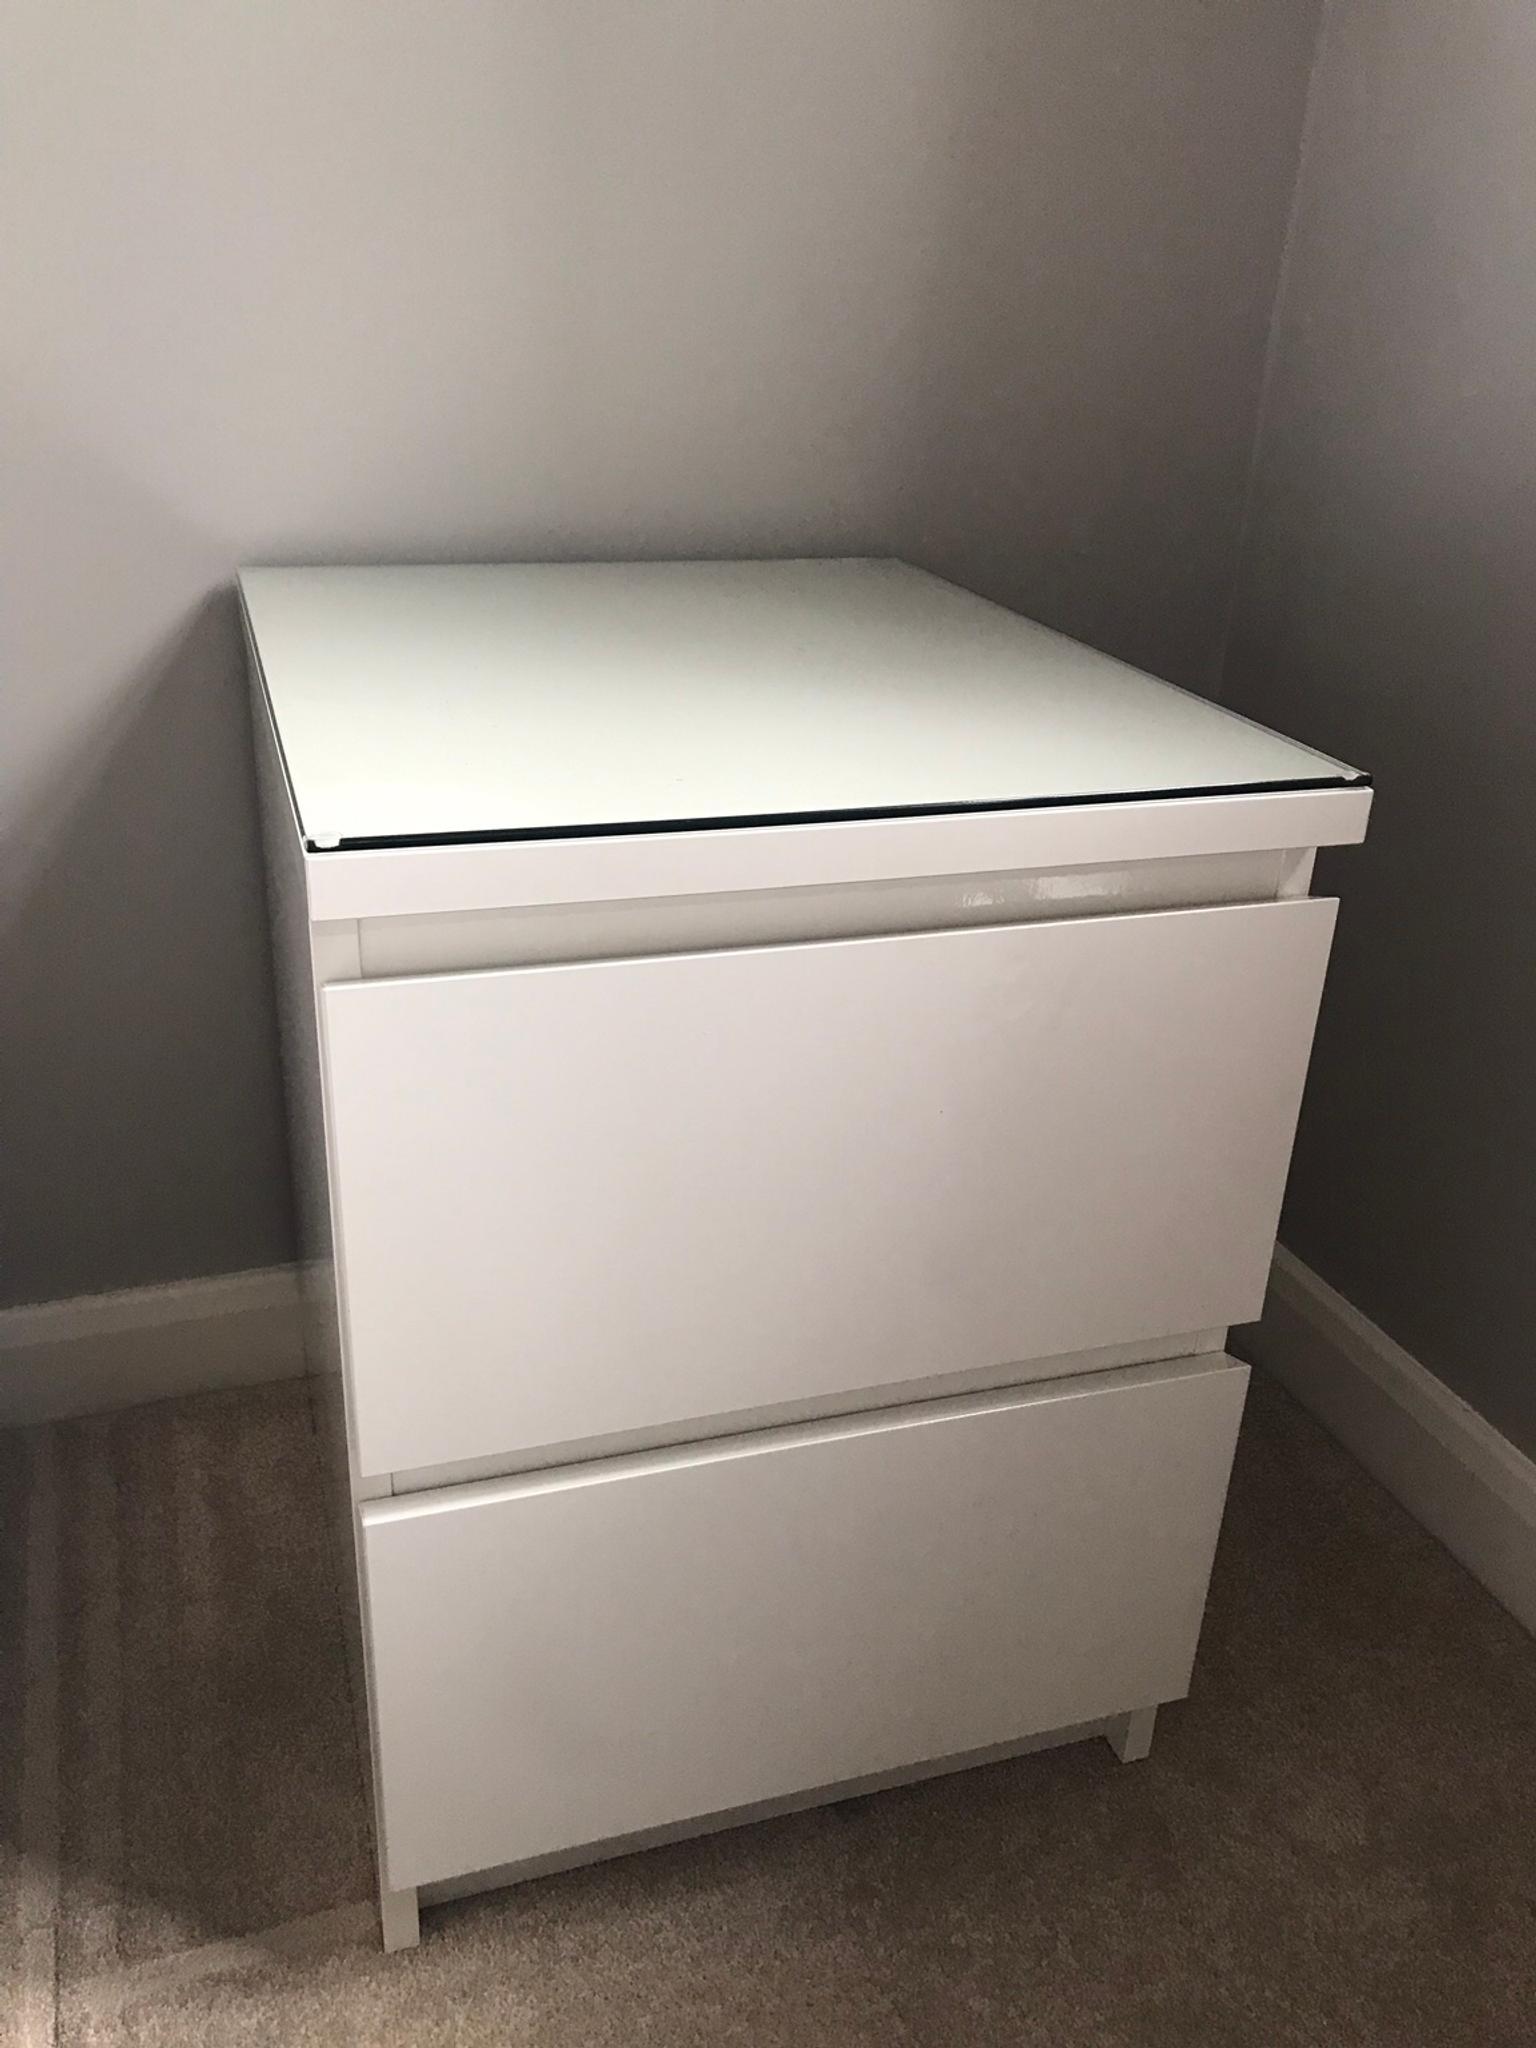 Ikea Malm White High Gloss Bedroom Furniture In Cv11 Hinckley And